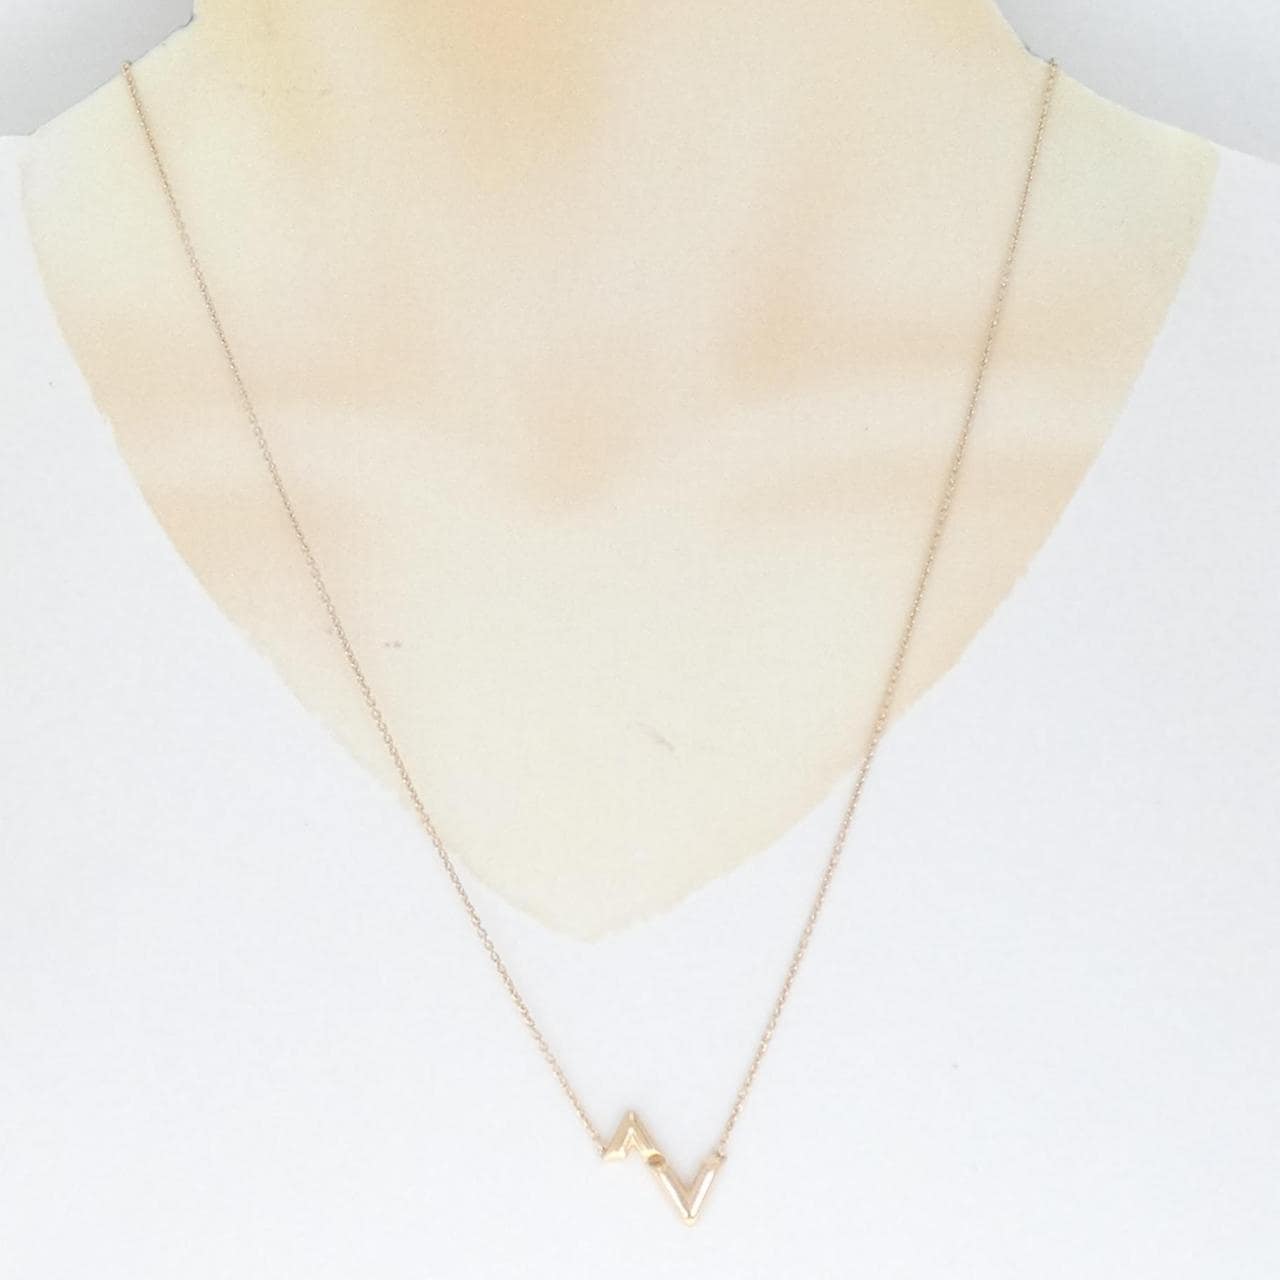 louis vuitton upsidedown necklace ネックレスsupreme